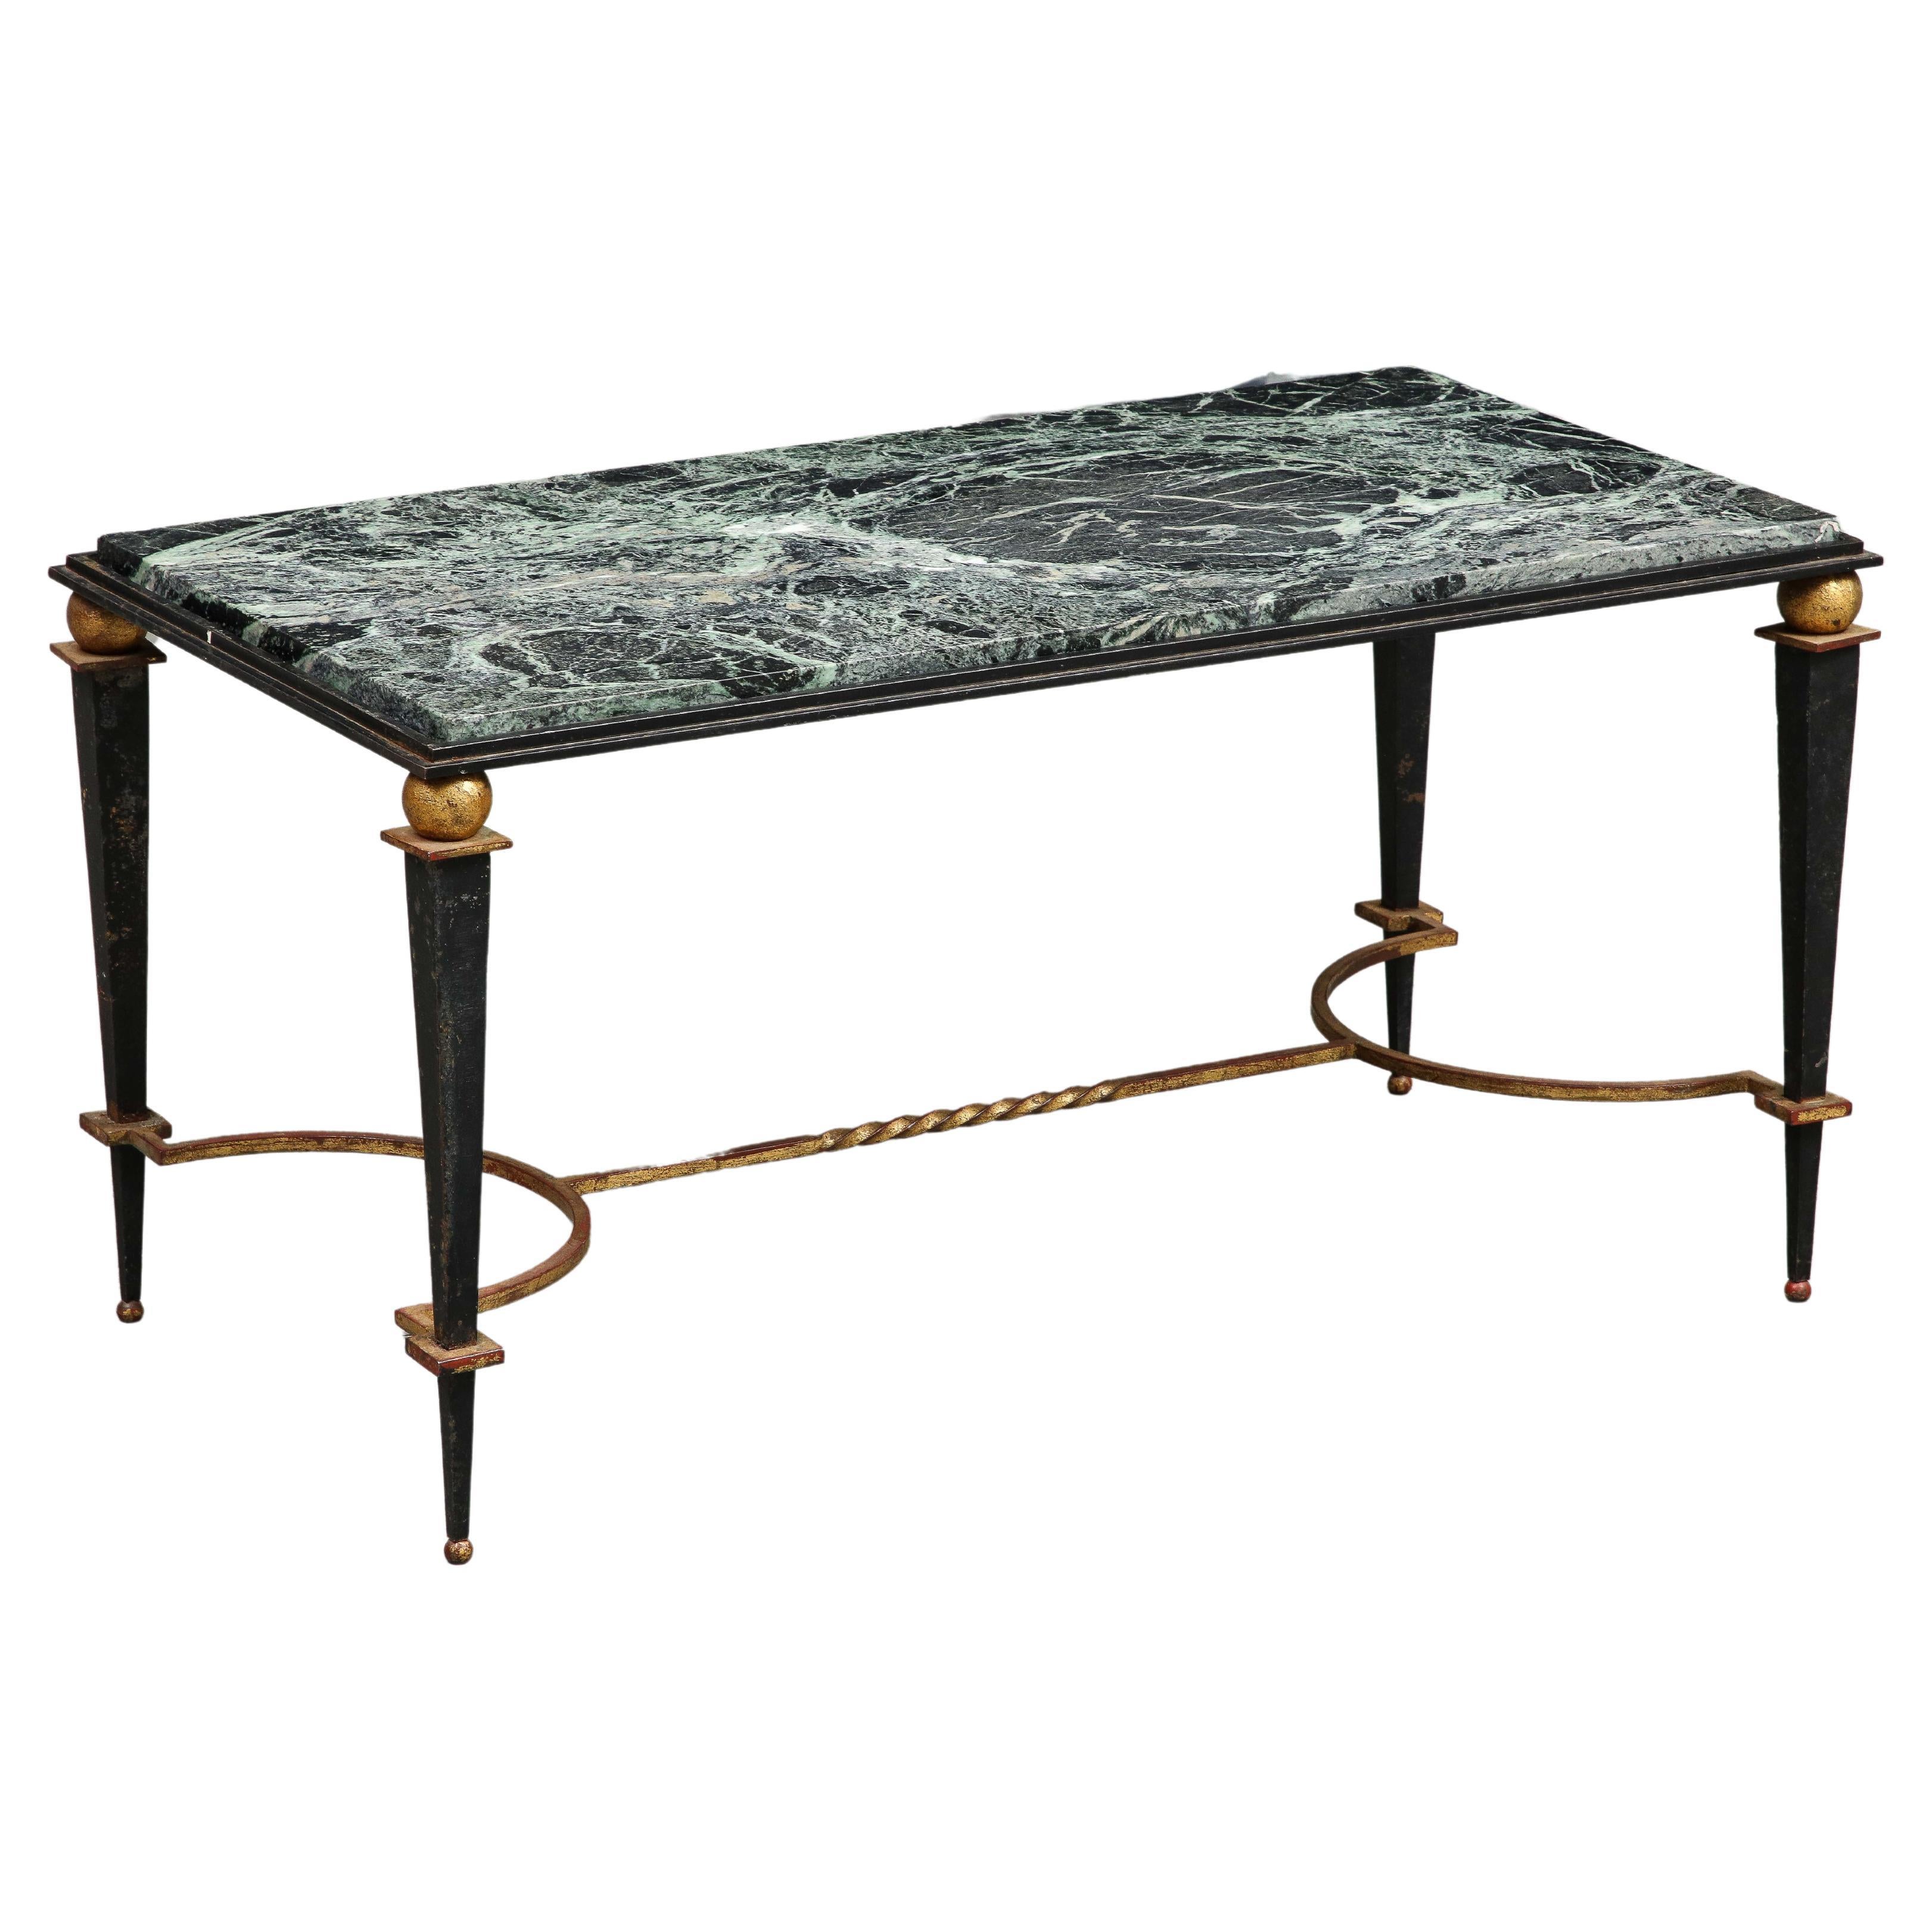 Midcentury French Maison Jansen Style Iron & Green Marble Coffee Table For Sale